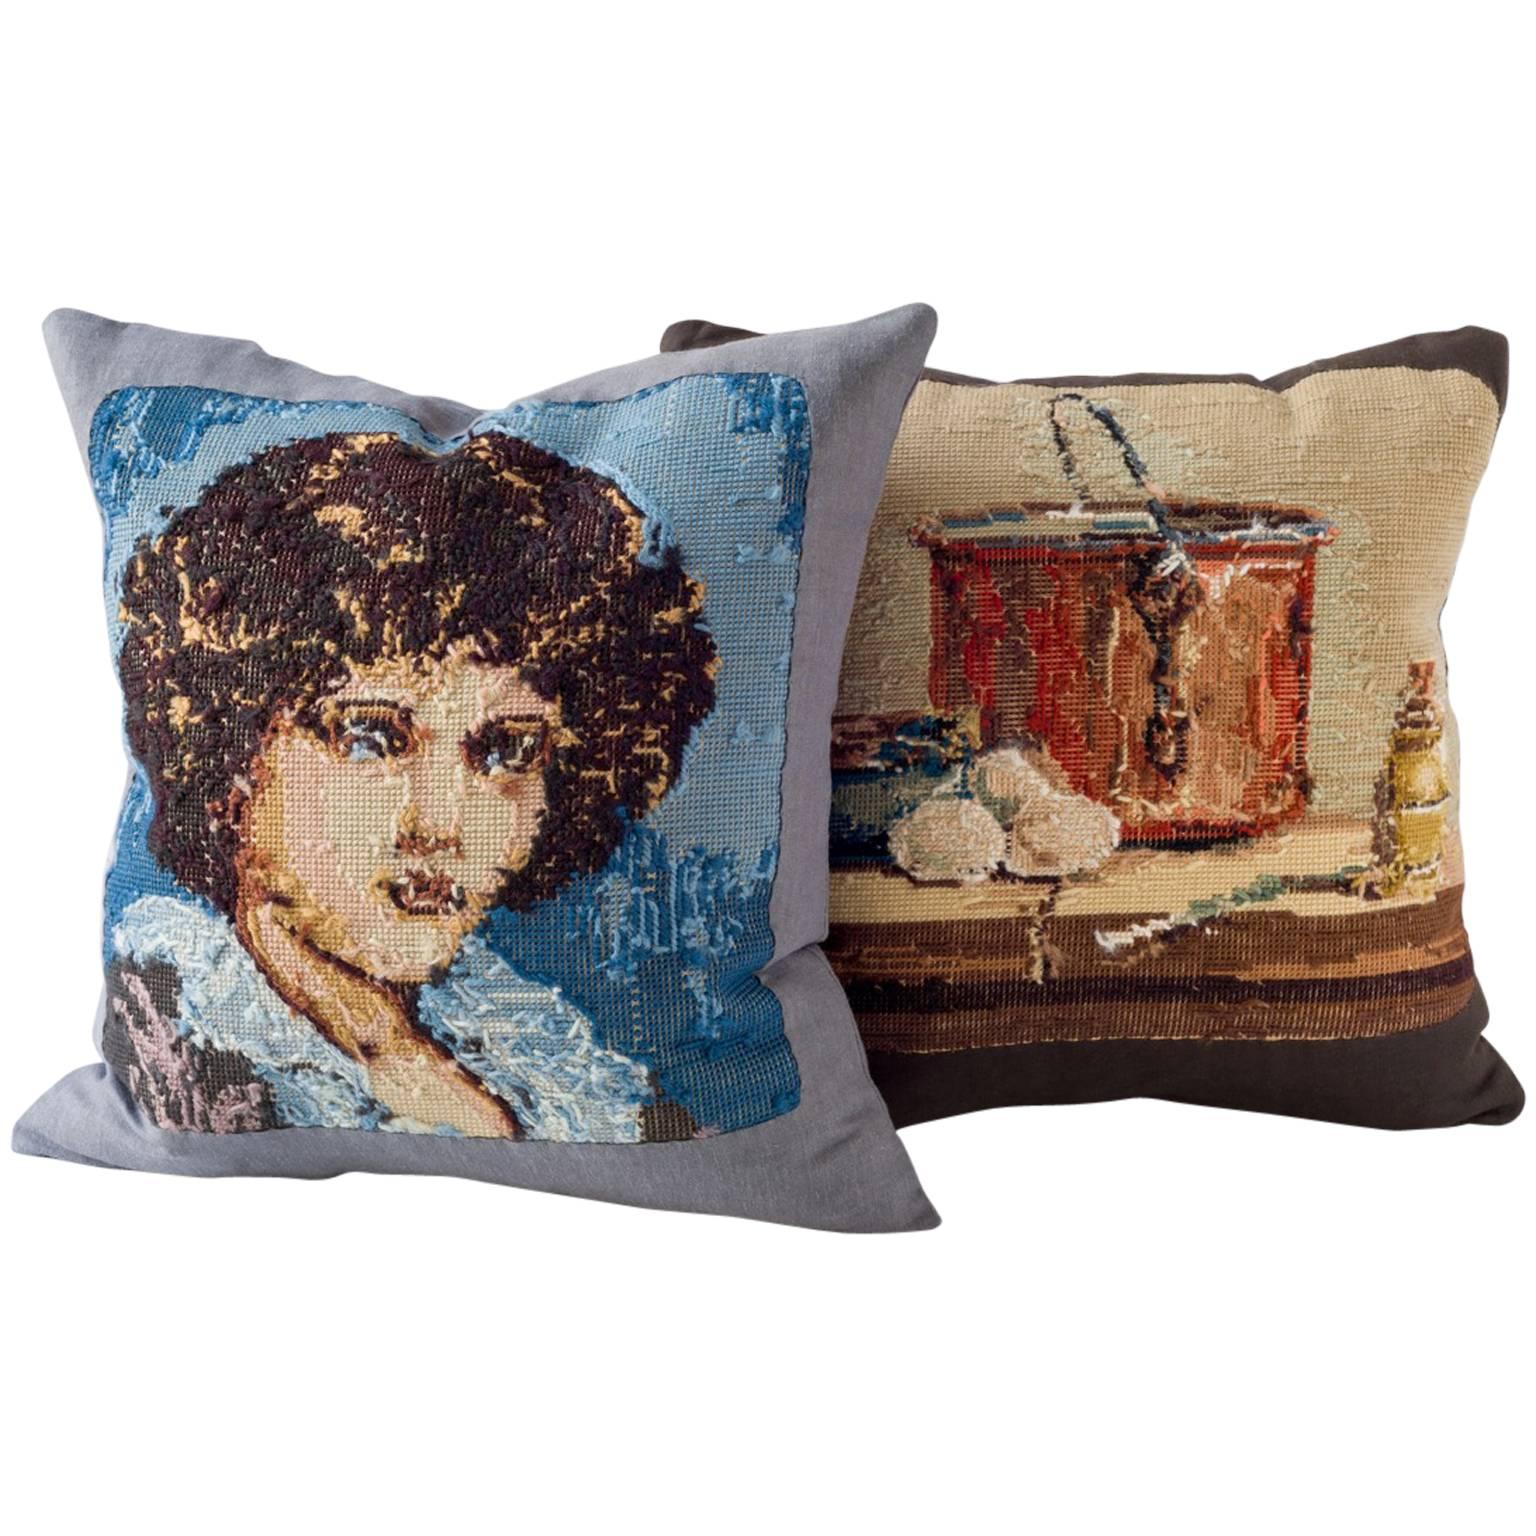 Vintage Reverse Needlepoint Cushions For Sale